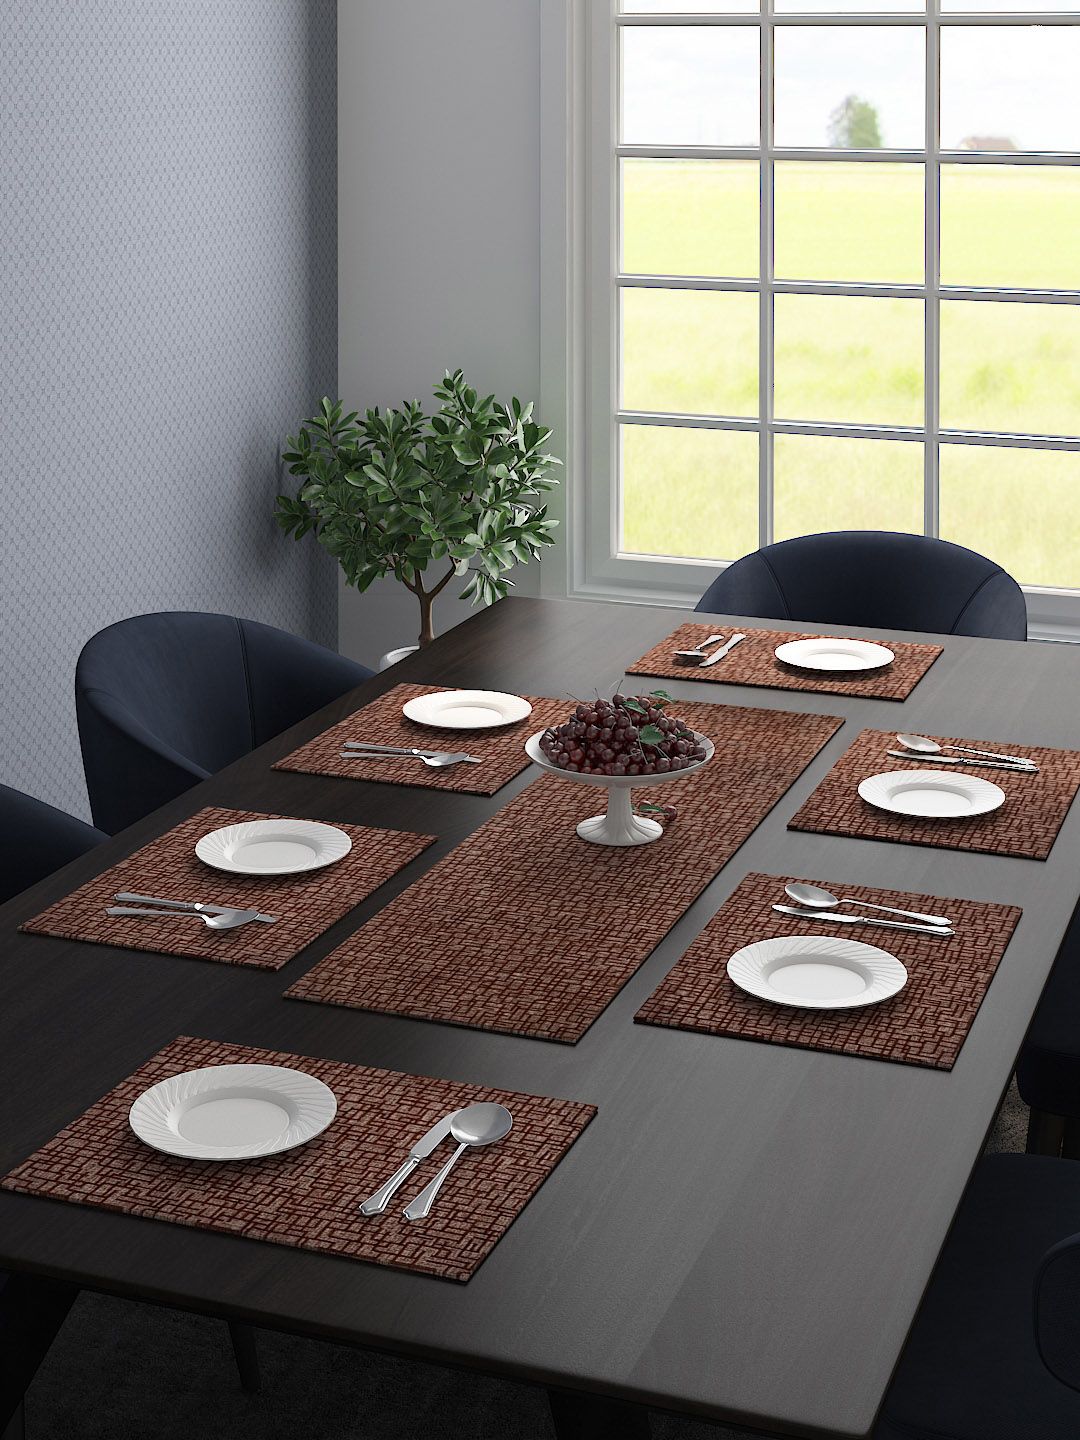 Saral Home Set Of 6 Brown Printed Table Placemats & 1 Runner Price in India